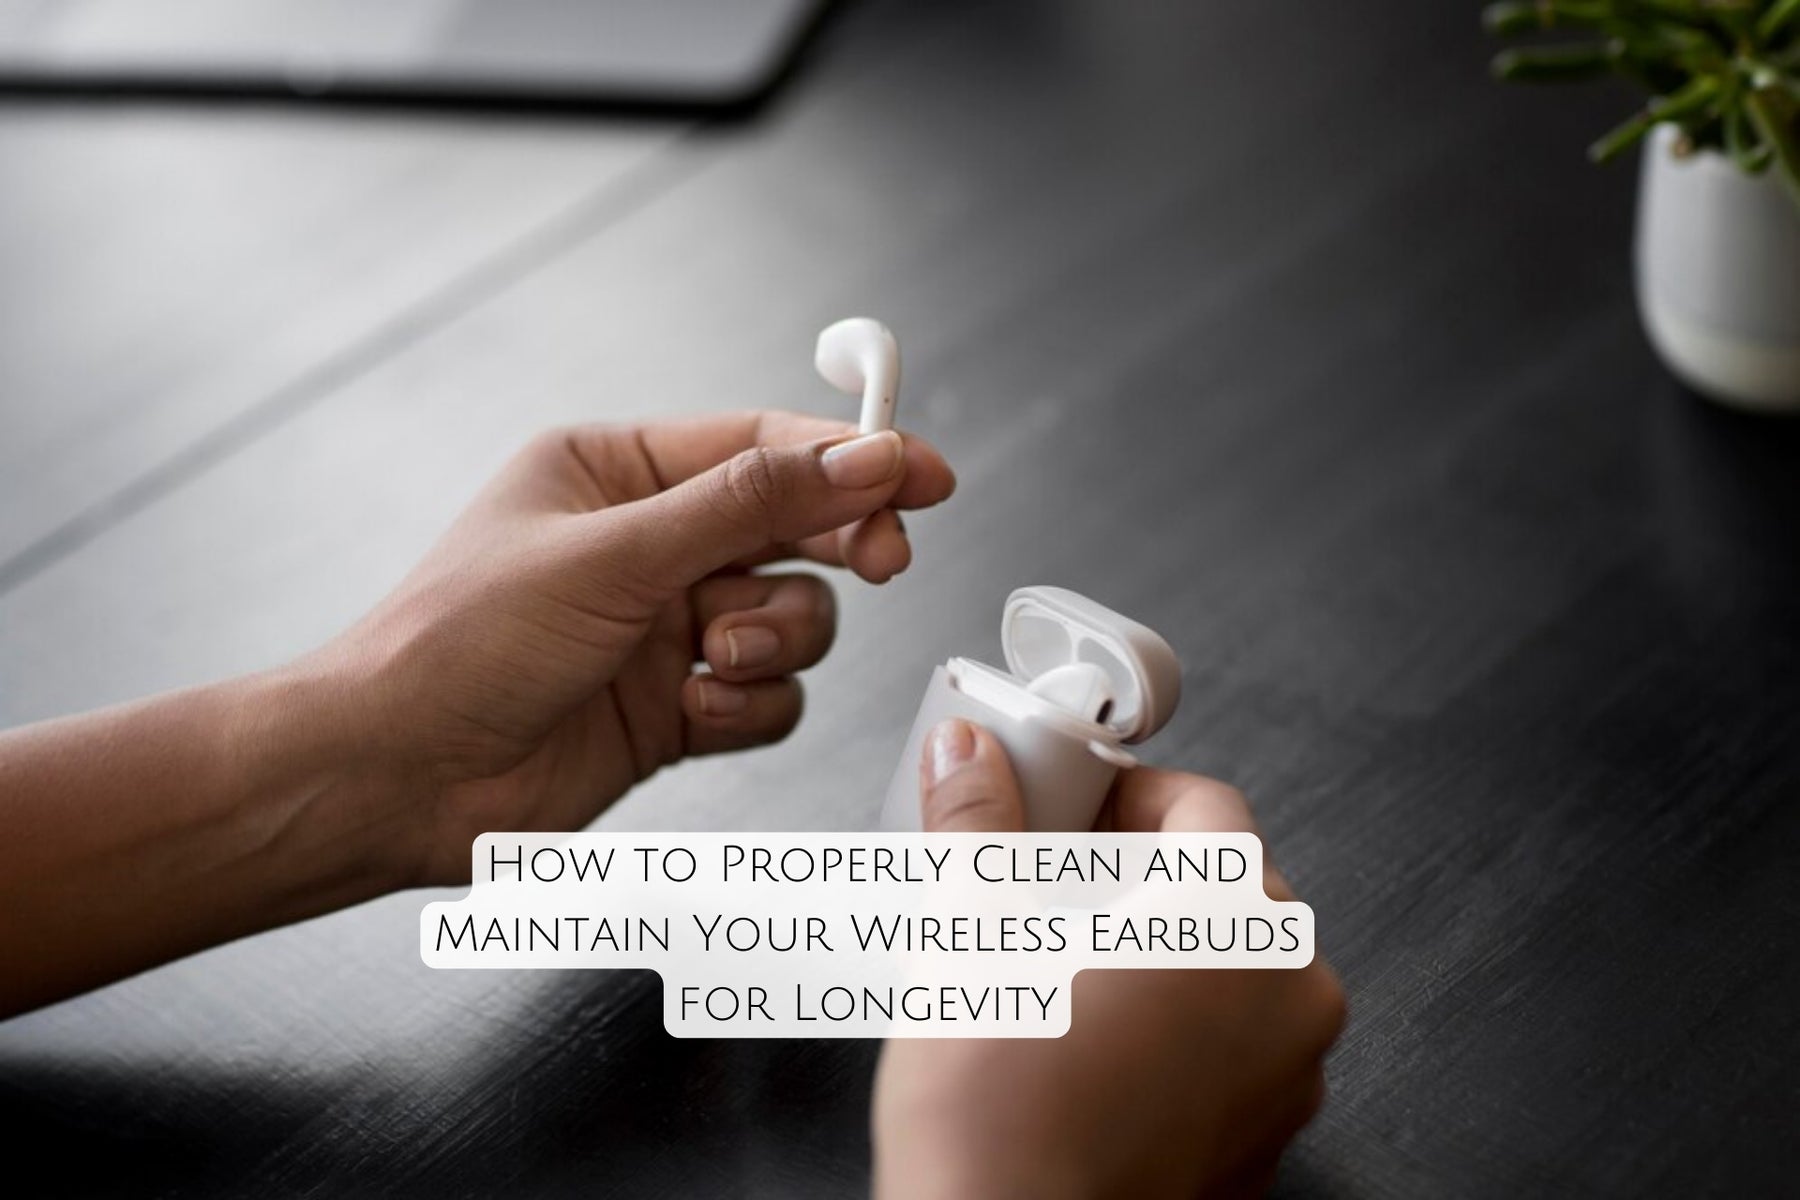 How to Properly Clean and Maintain Your Wireless Earbuds for Longevity